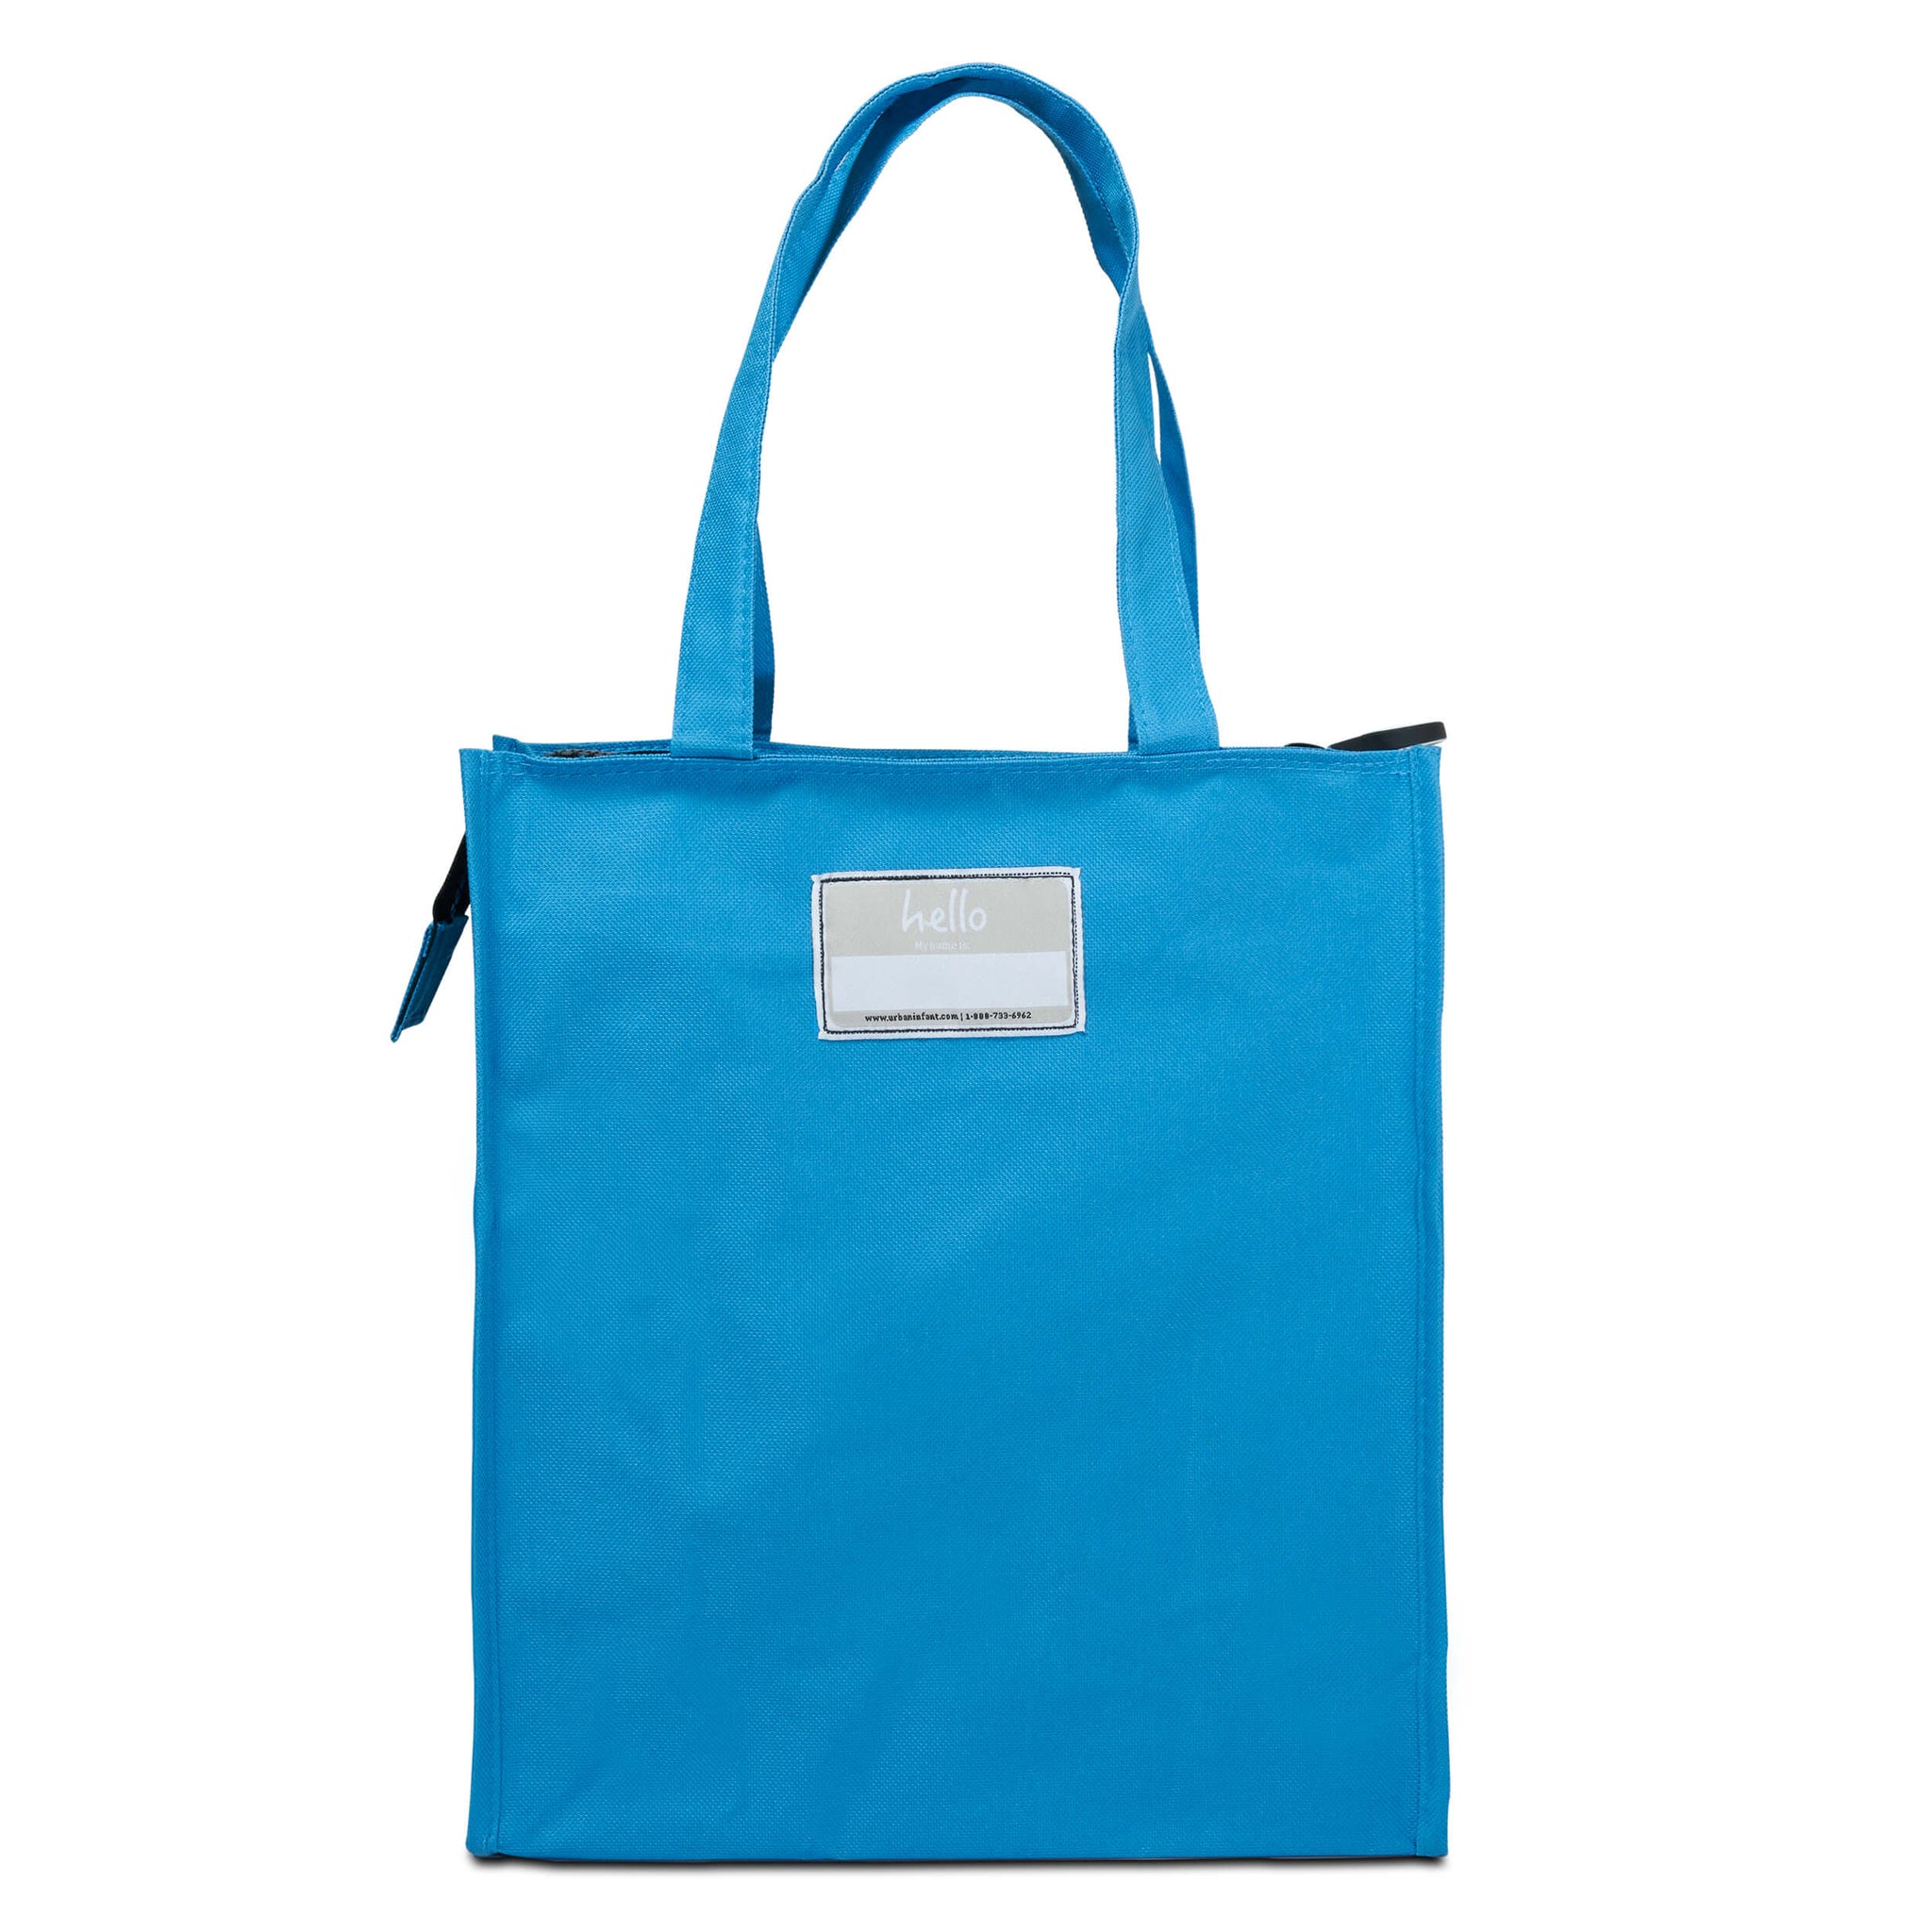 Activity Tote - Case of 6 – Urban Infant